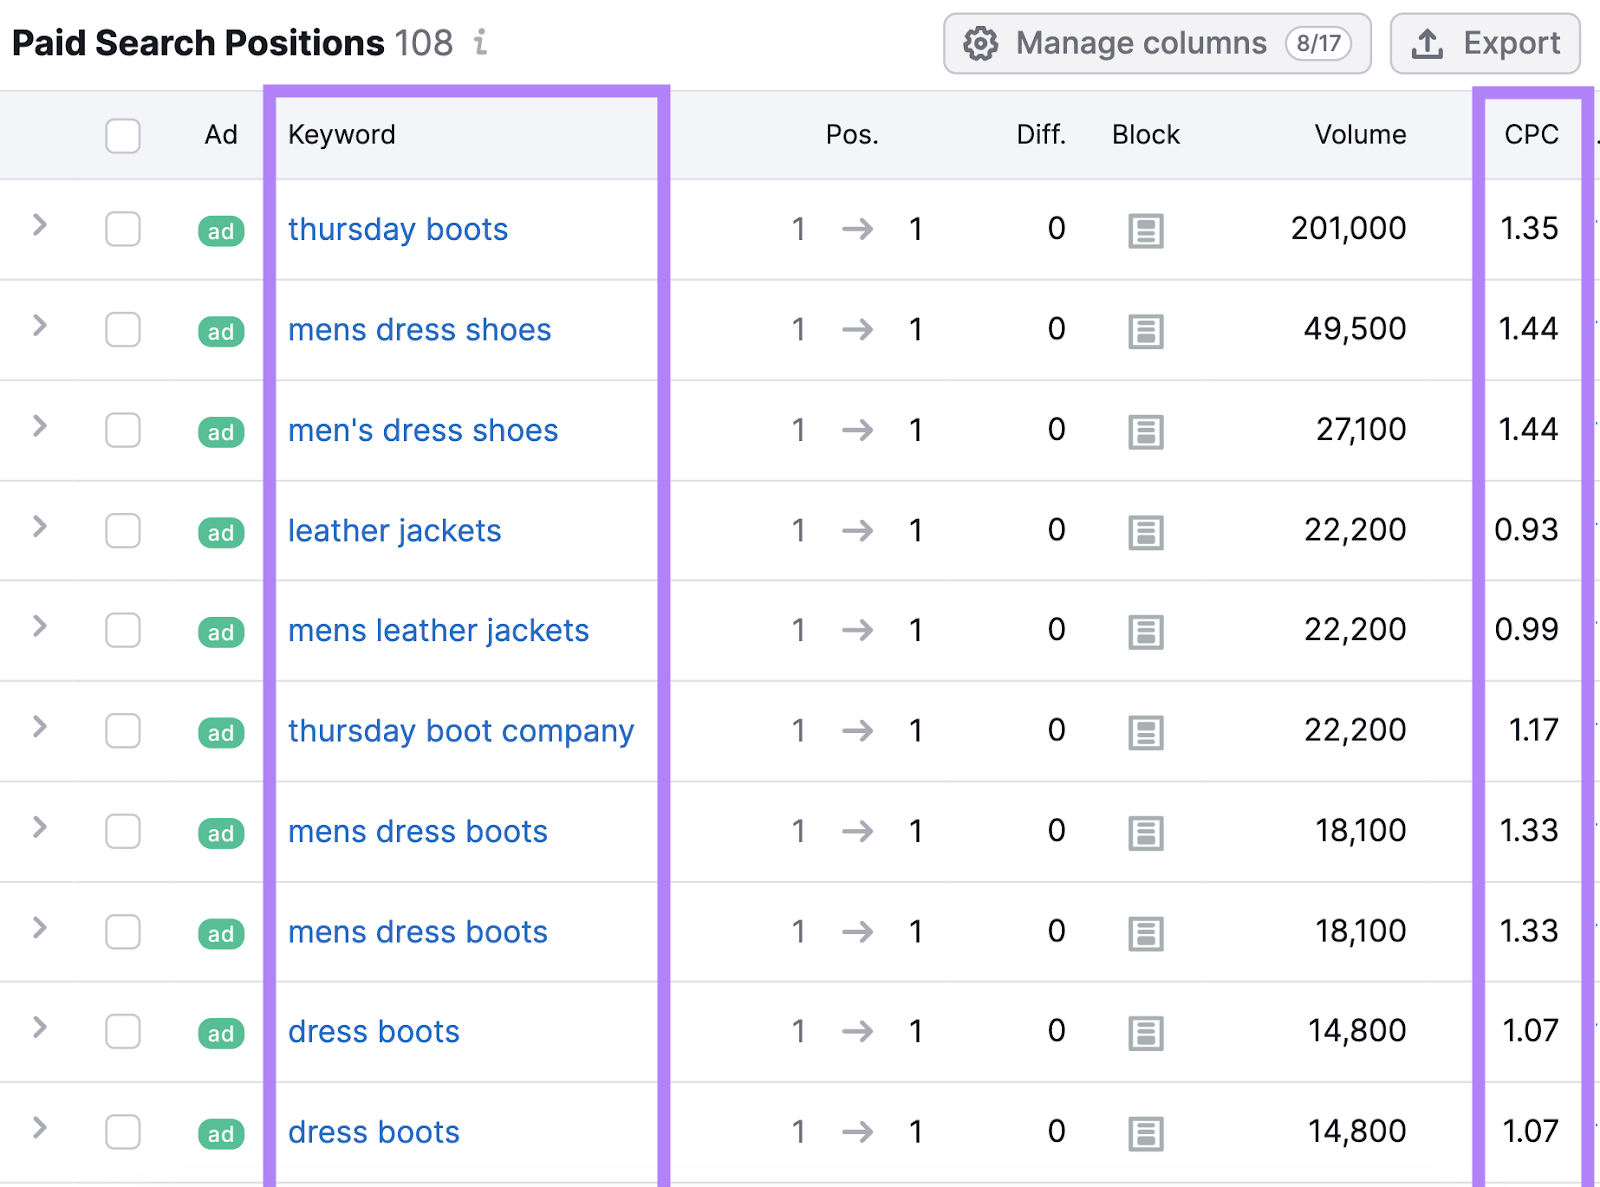 “Paid Search Positions” table shows all the keywords your competitor is bidding on, including their metrics, like CPC